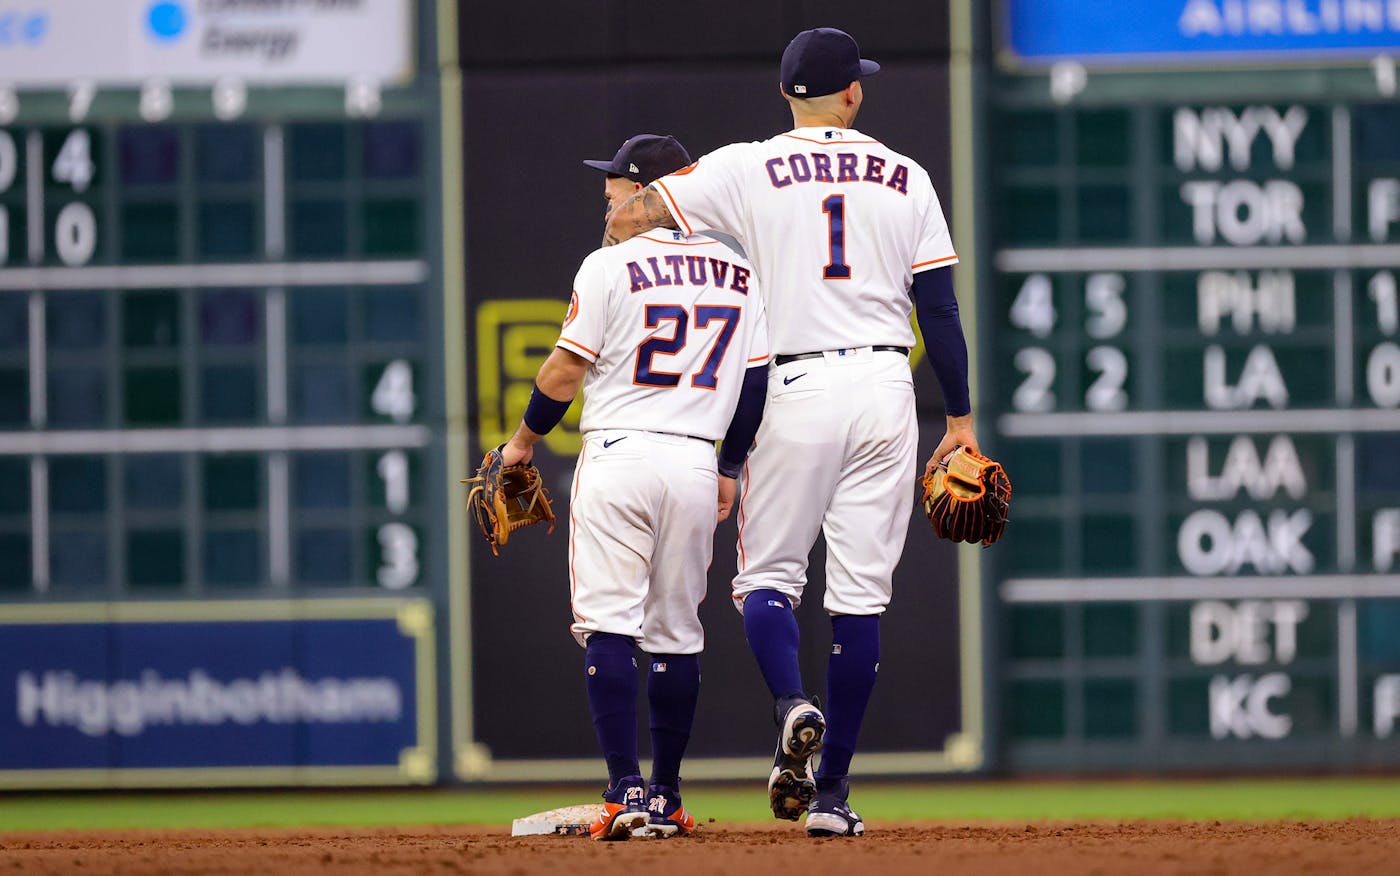 Astros injury update: Latest on Brantley, McCullers, Altuve